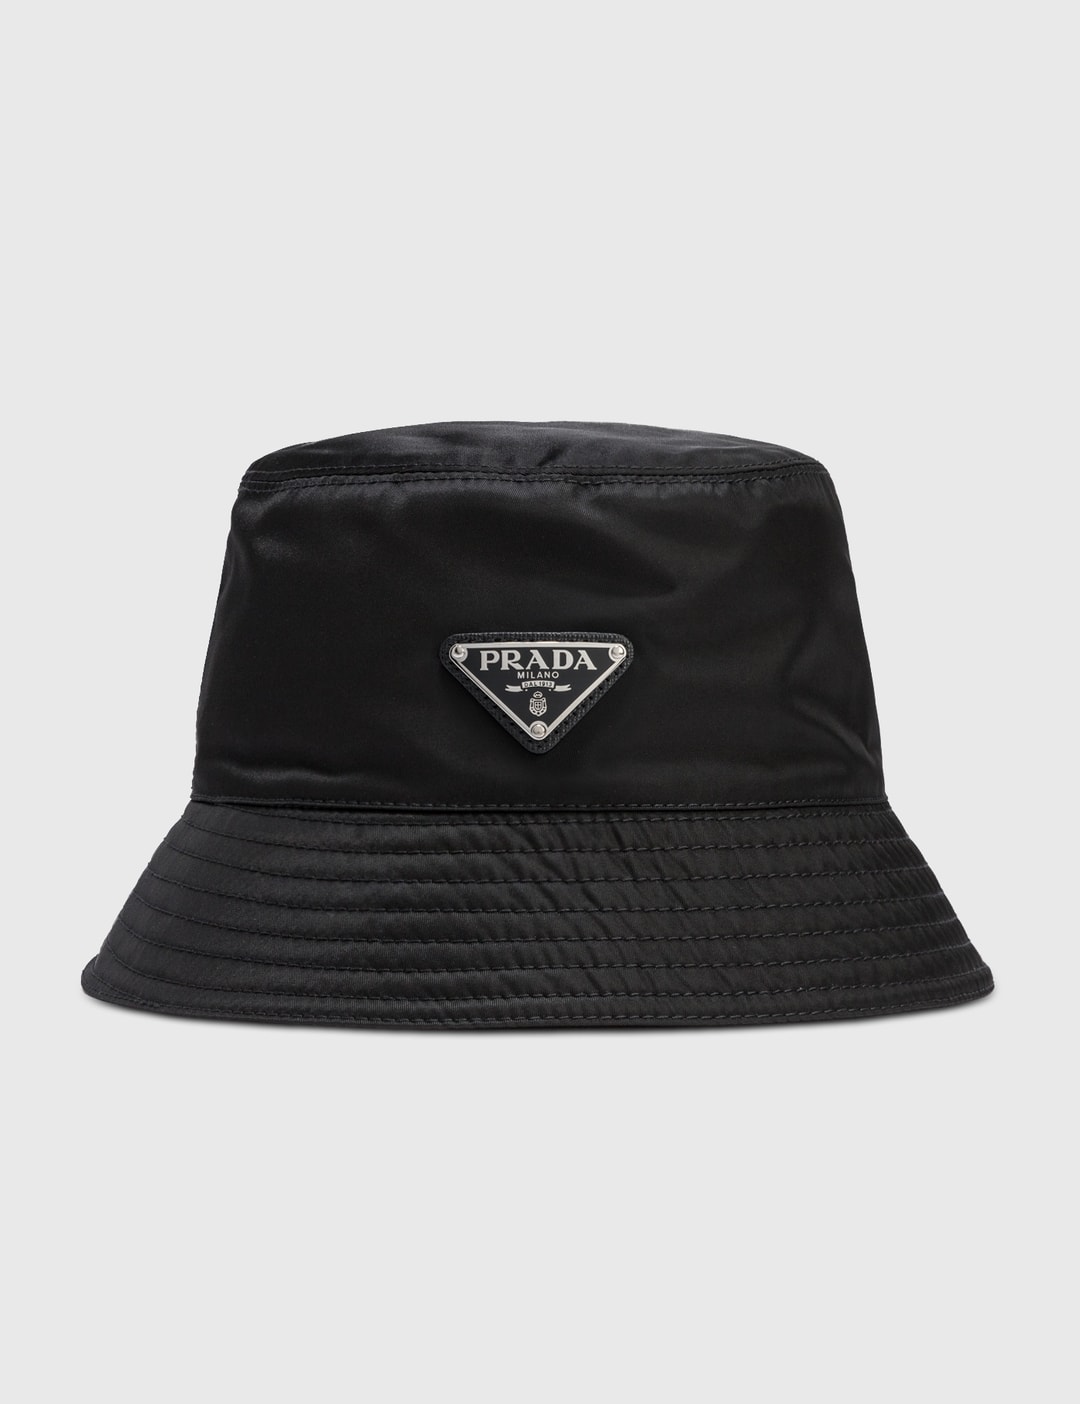 Prada - Re-Nylon Bucket Hat | HBX - Globally Curated Fashion and Lifestyle  by Hypebeast